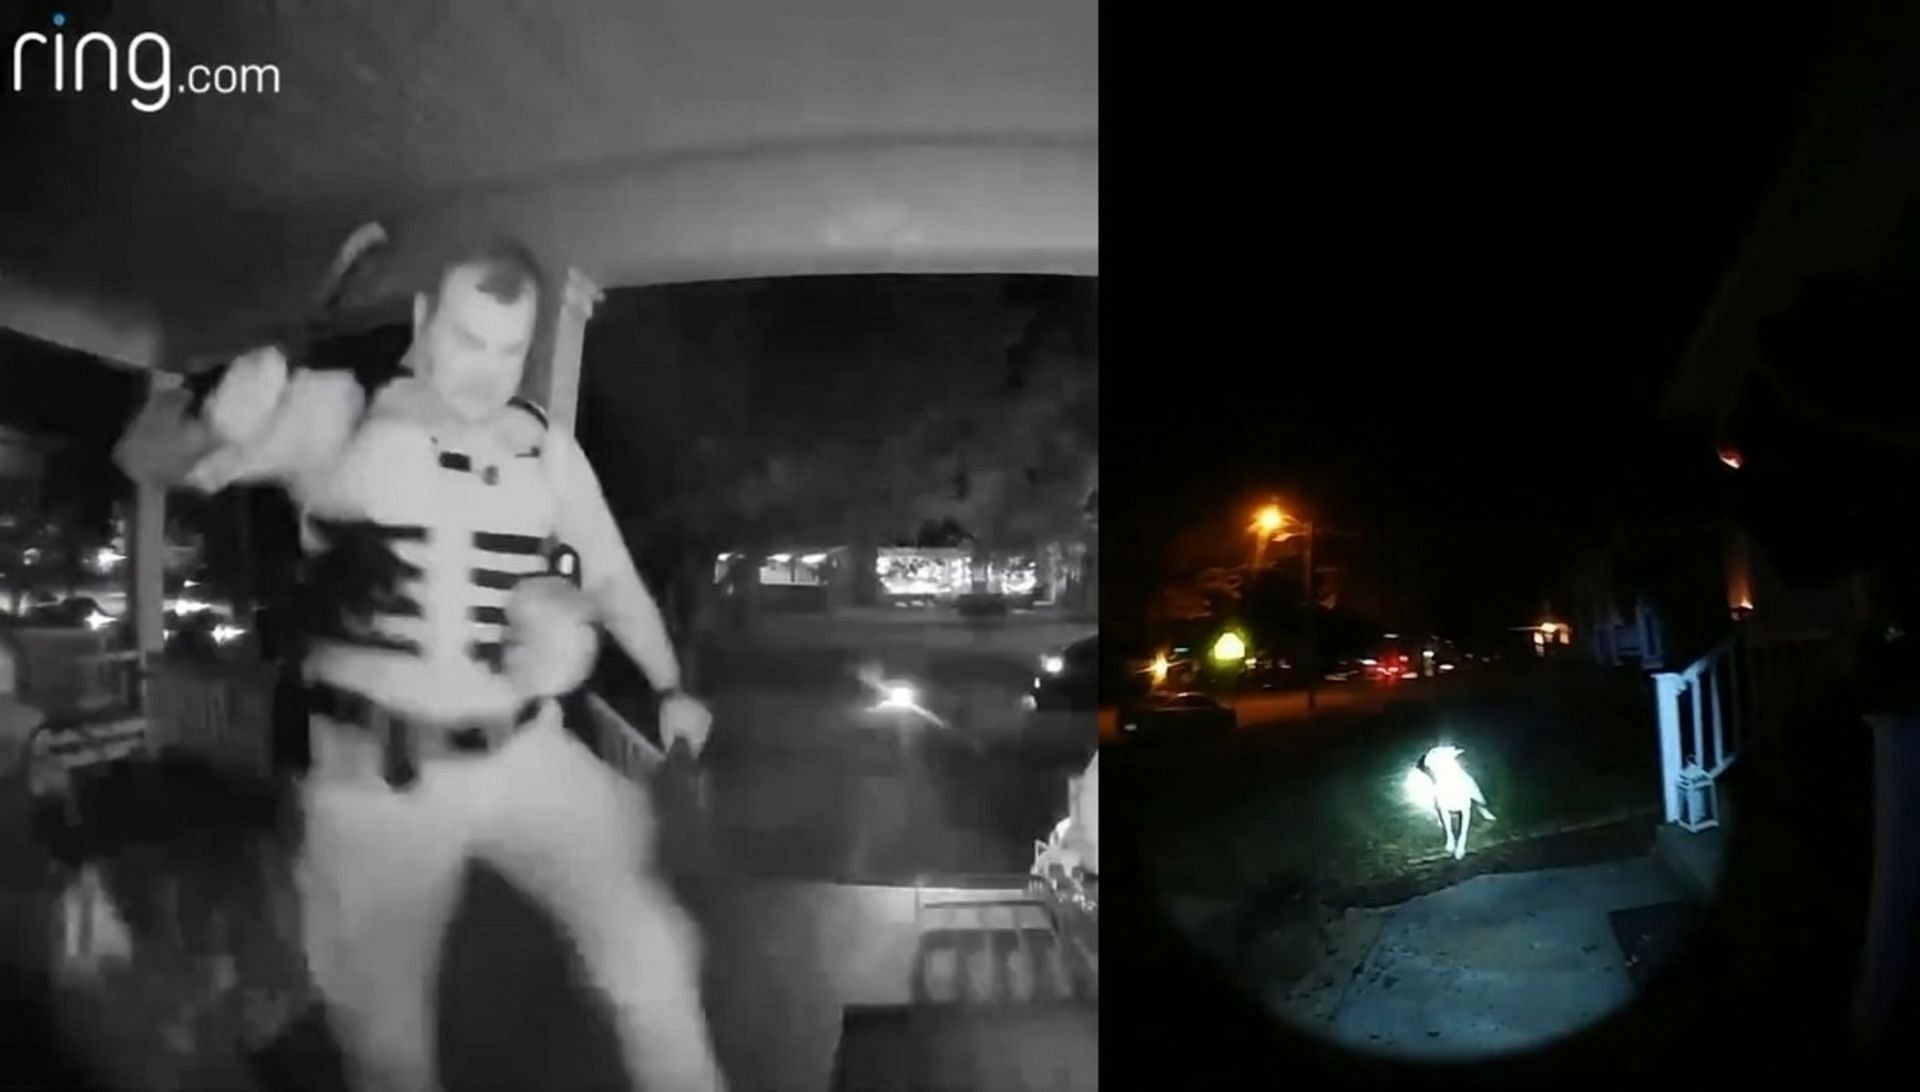 The Ring doorbell video and the bodycam footage (Image via haleyjrichey/Twitter and Terre Haute PD/Facebook)